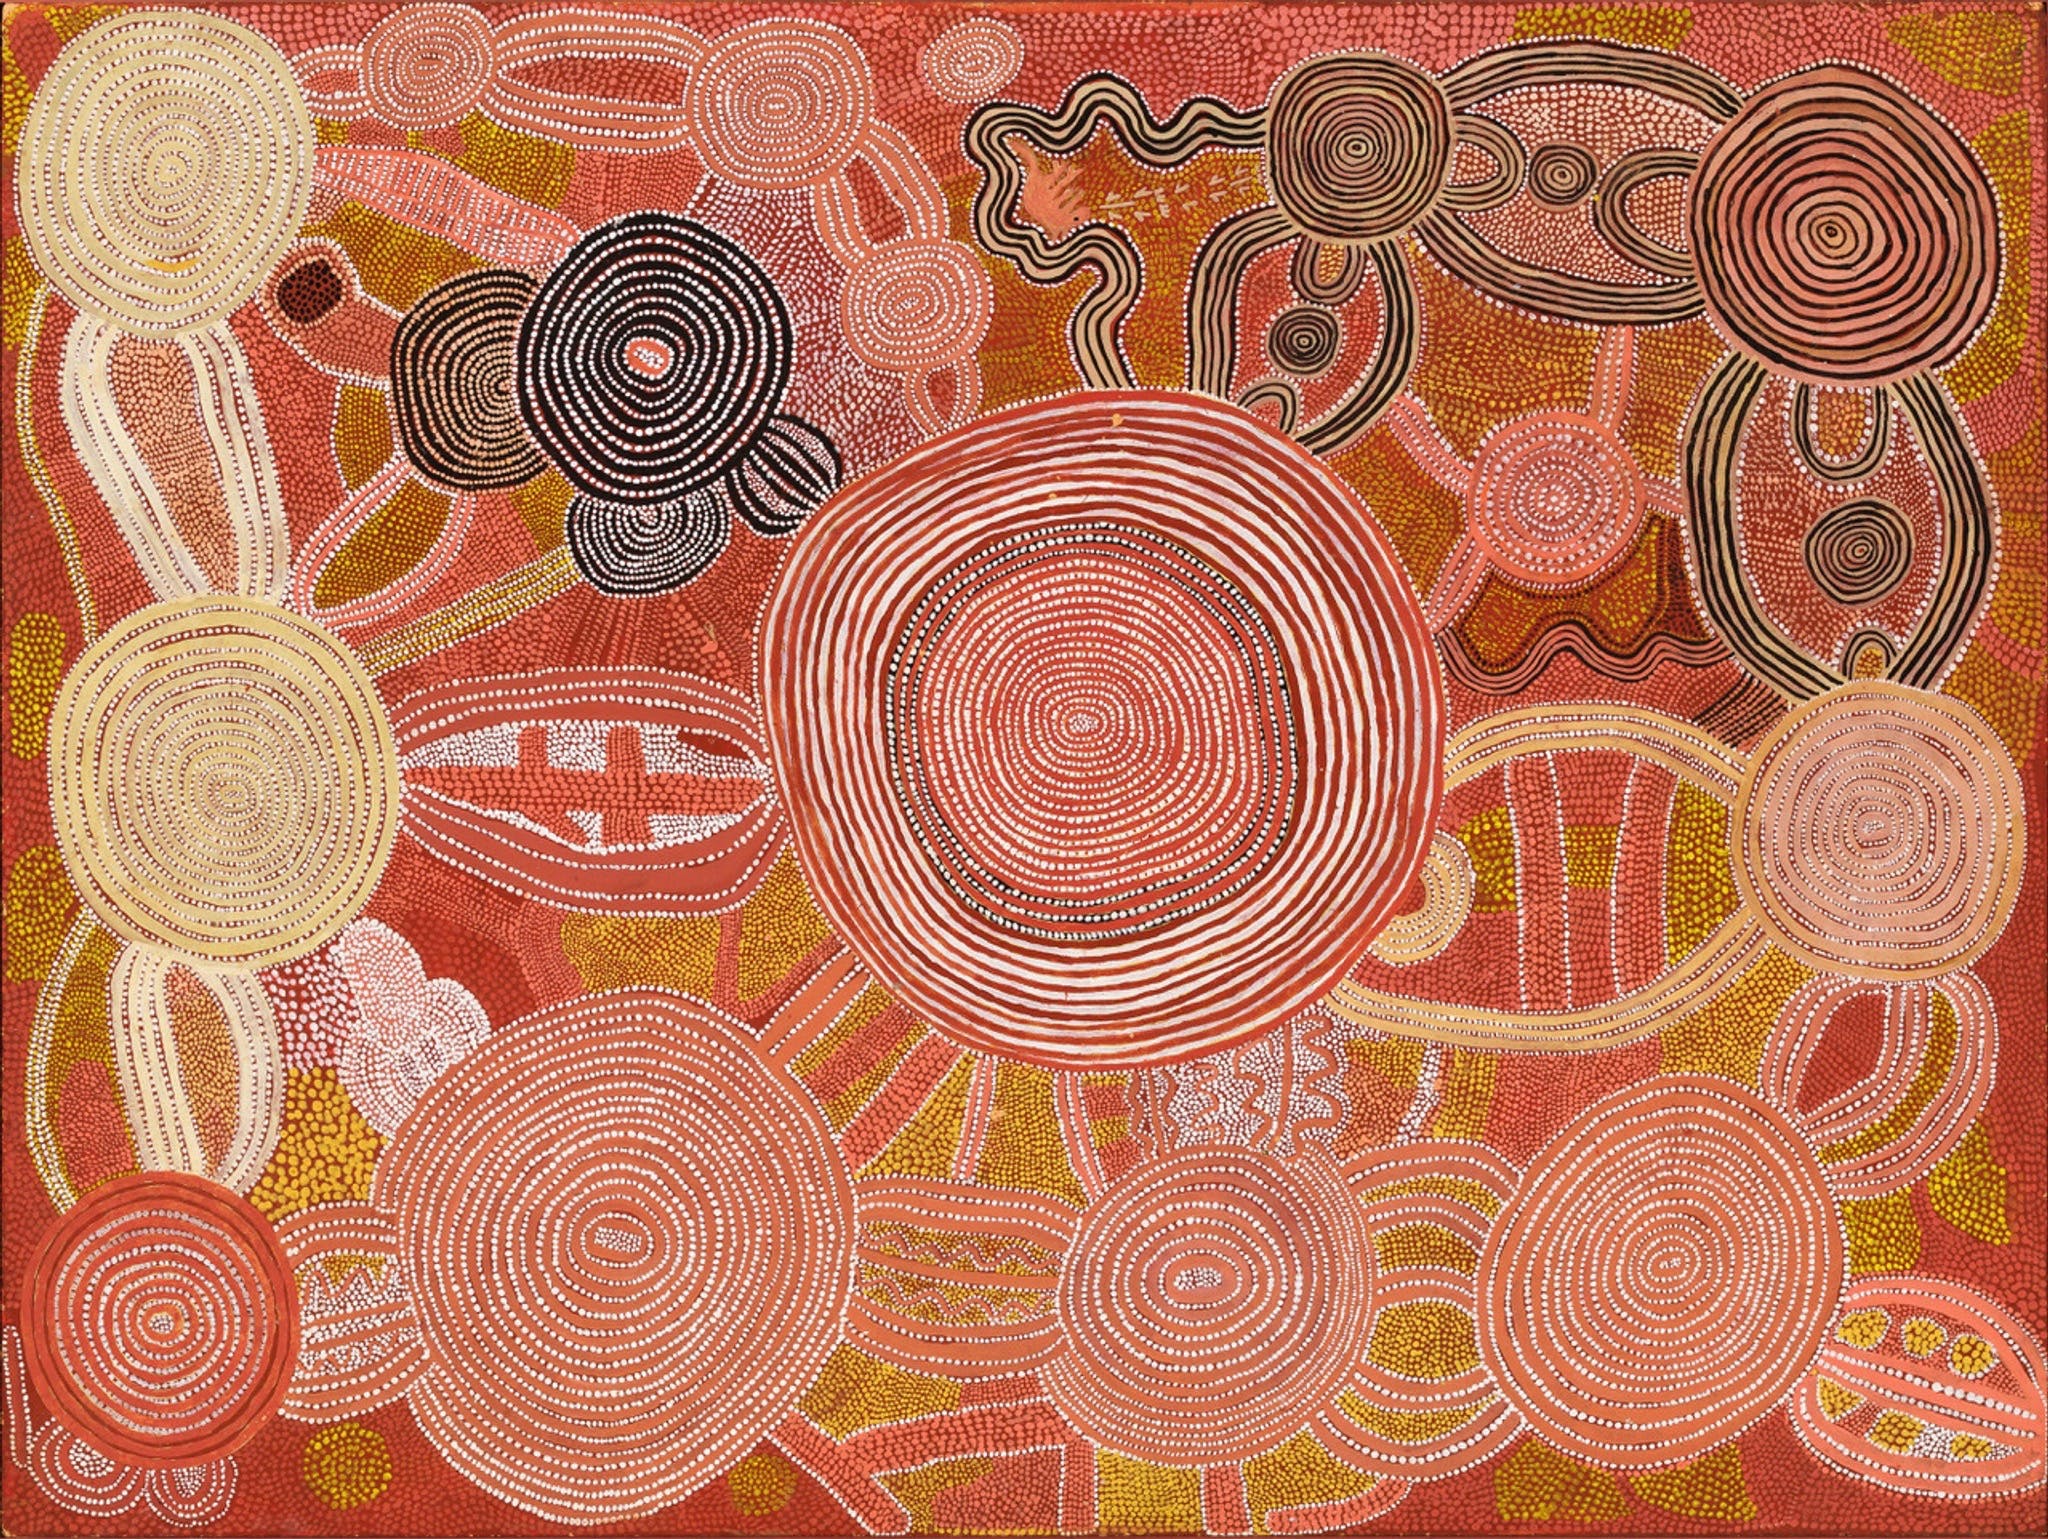 Reverence Exhibition of Australian Indigenous Art - Pubs and Clubs